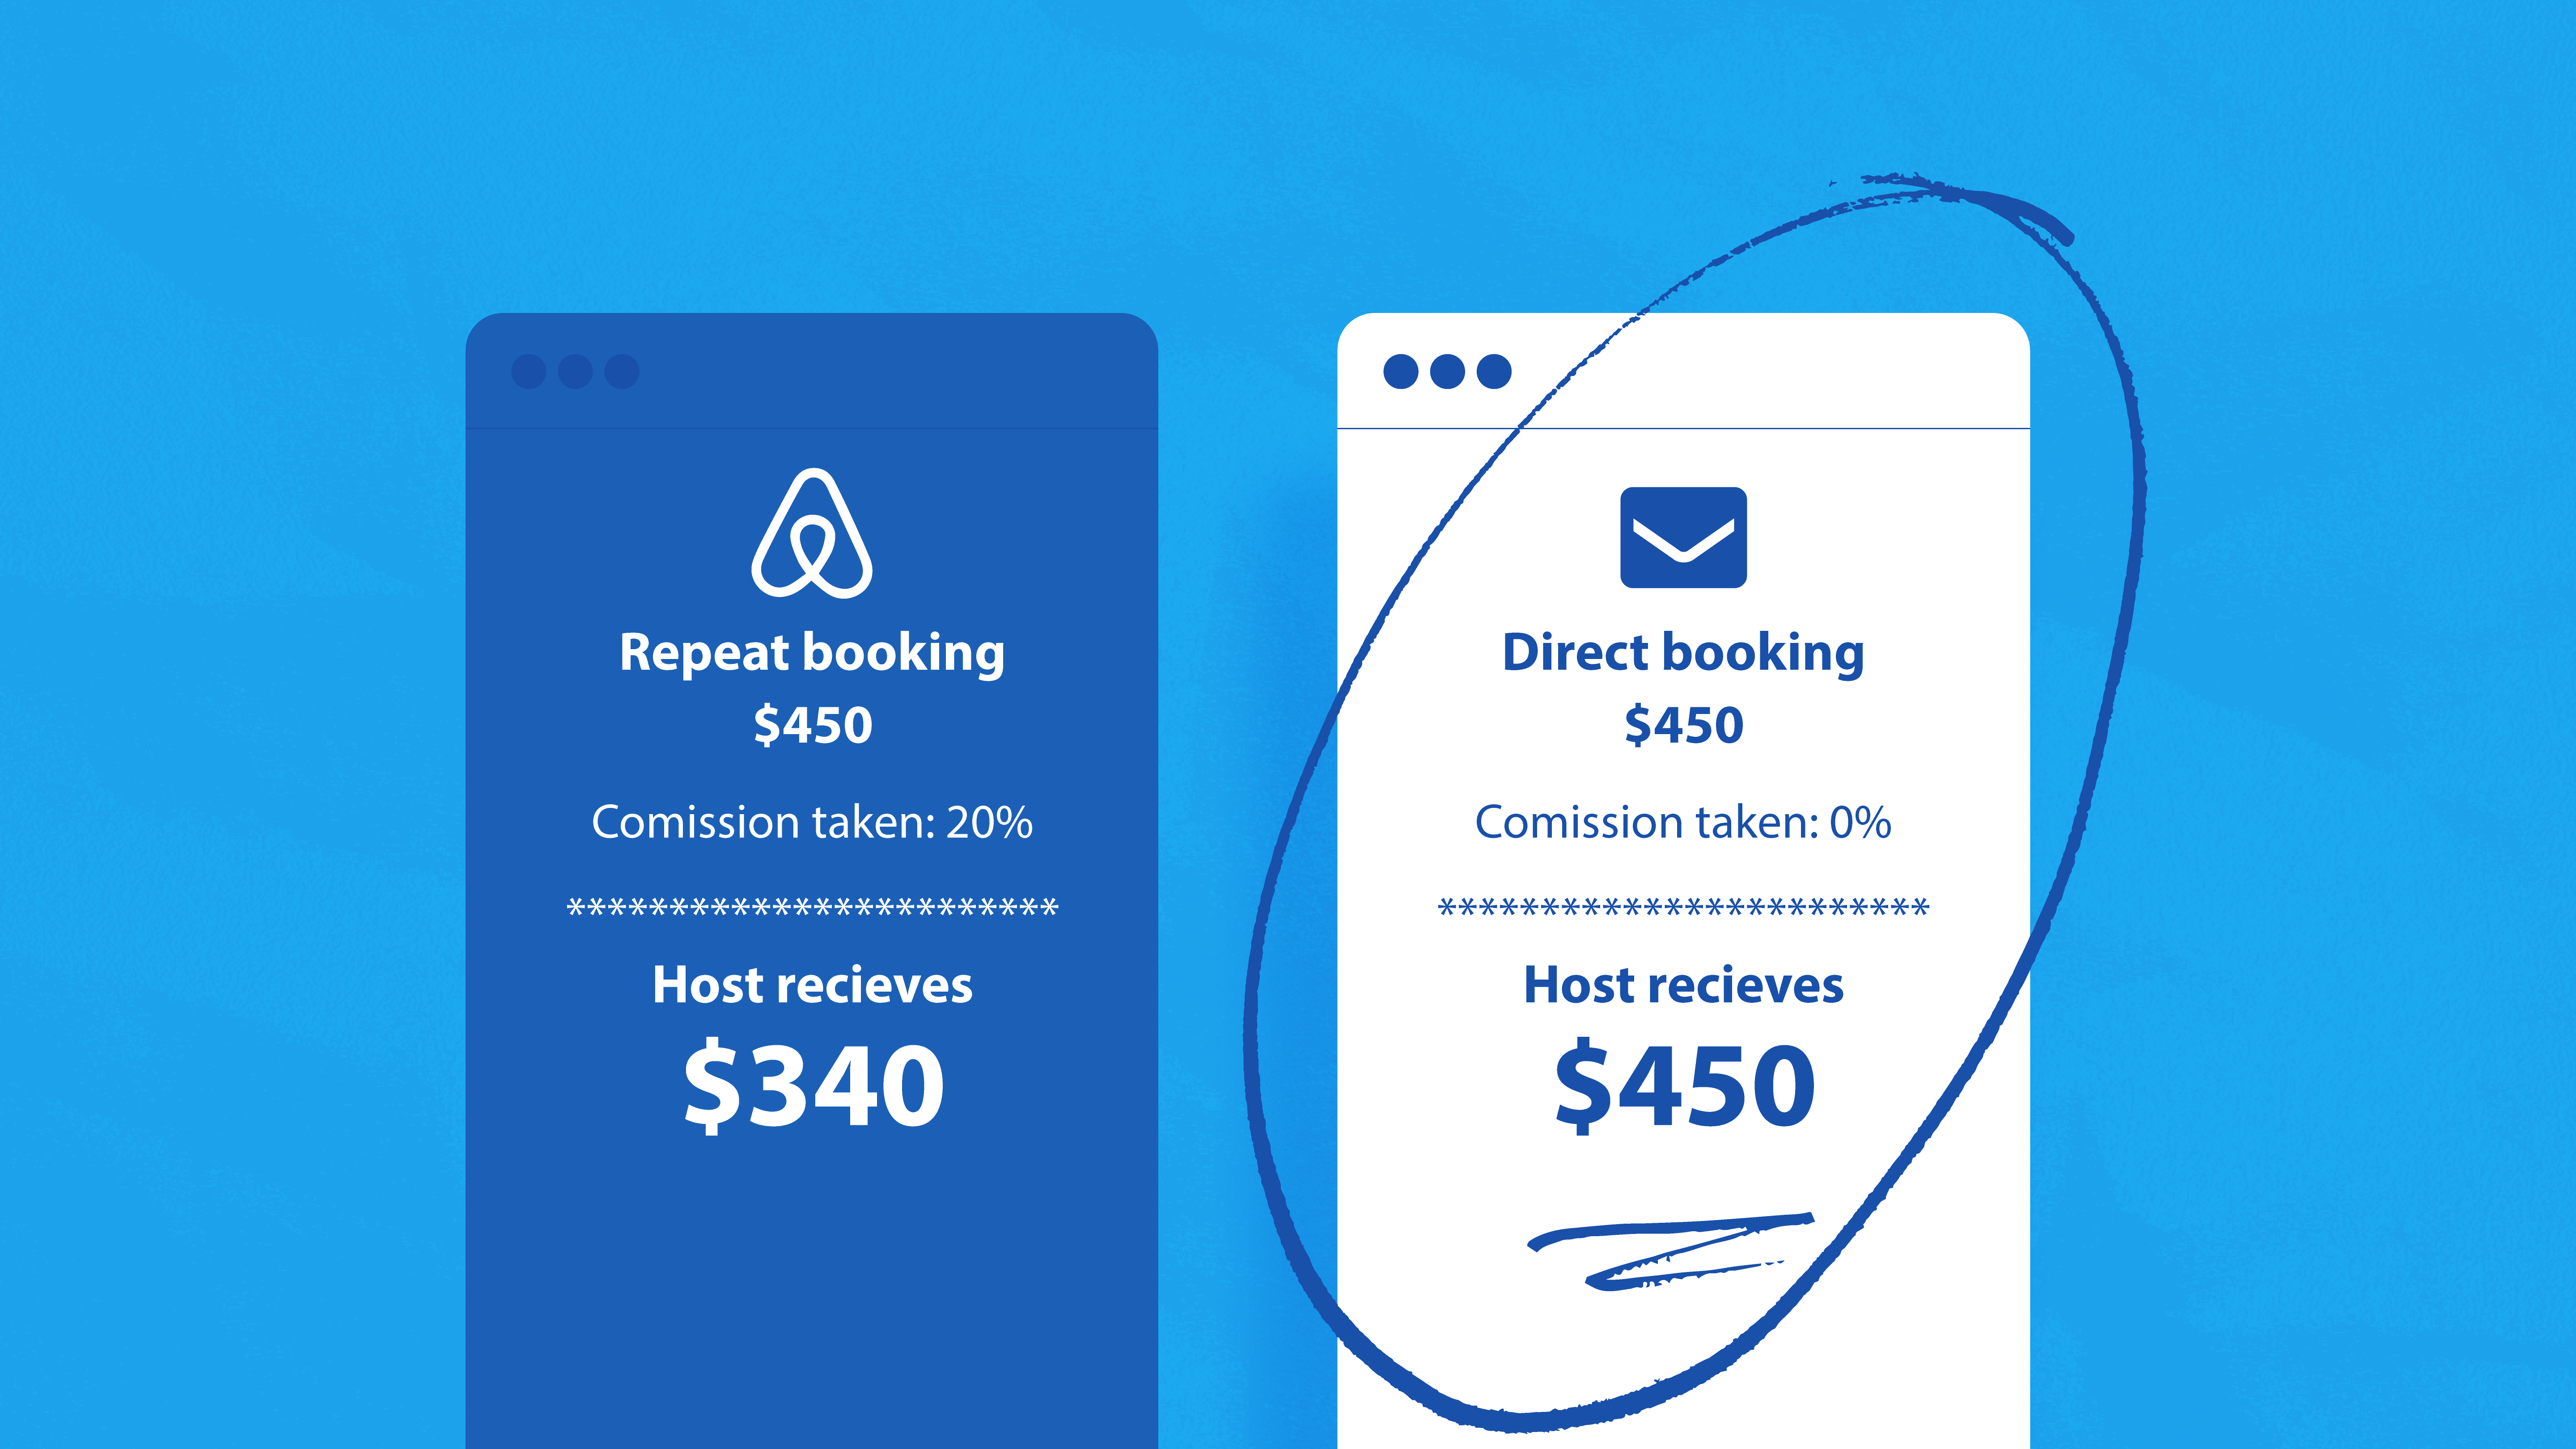 Graphic showing Airbnb host fees and service fee payments example for a repeat booking.